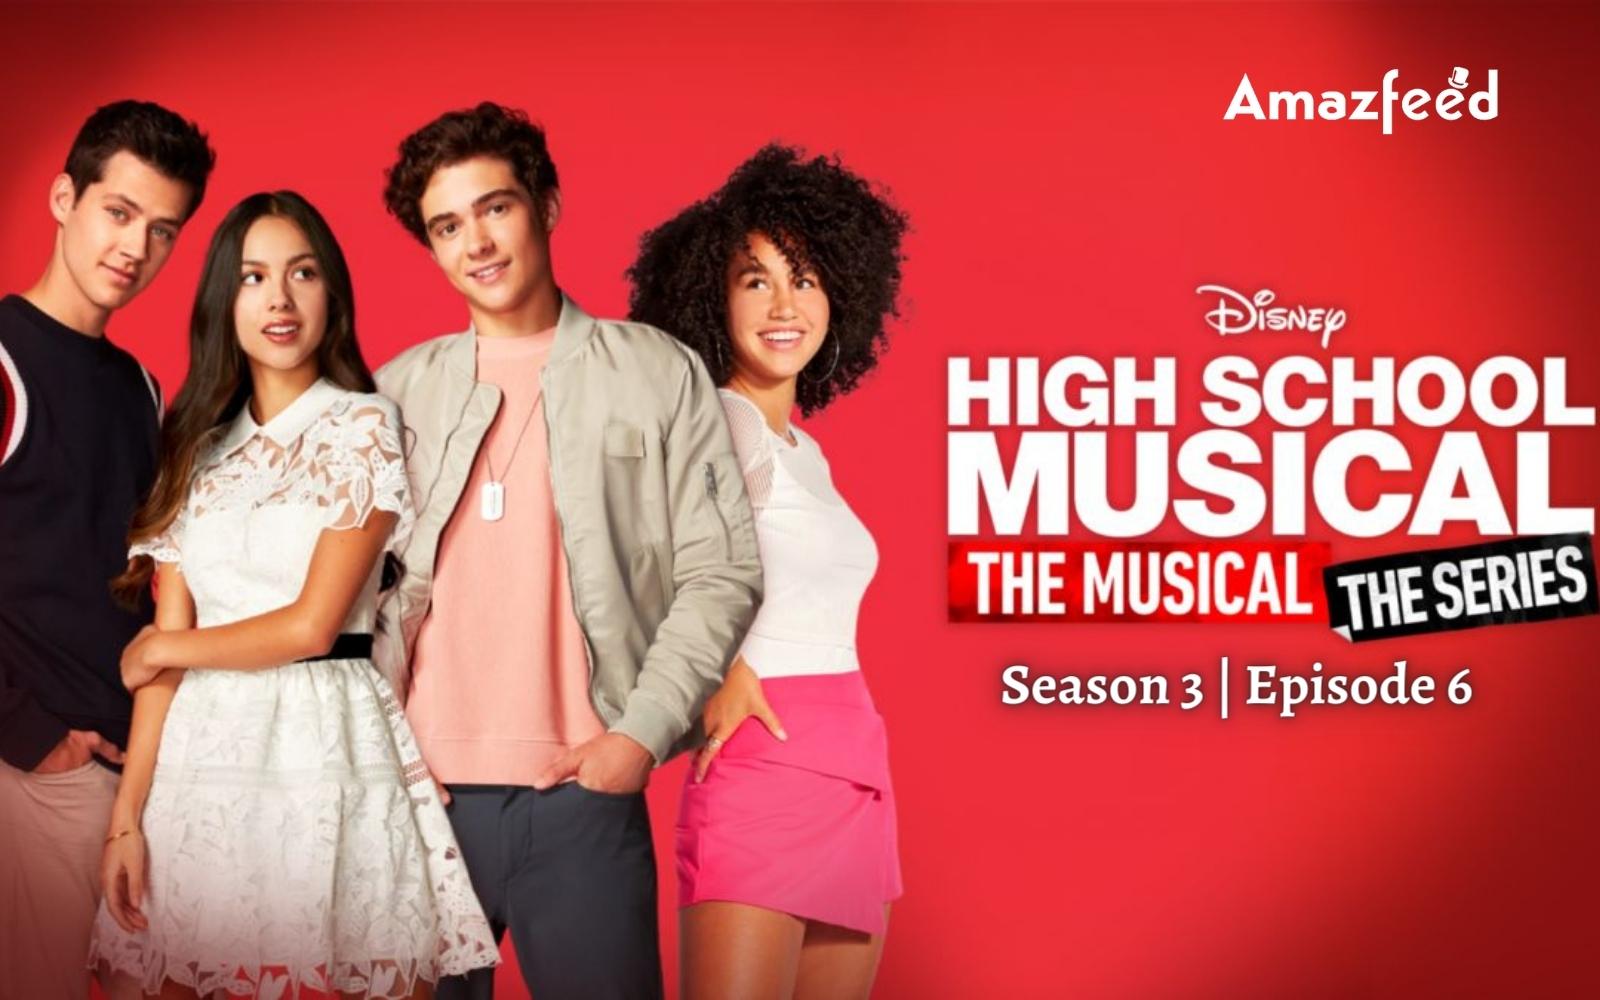 High School Musical: The Musical - The Series Season 3 Episode 6 ⇒ Countdown, Release Date, Spoilers, Recap, Cast & News Updates